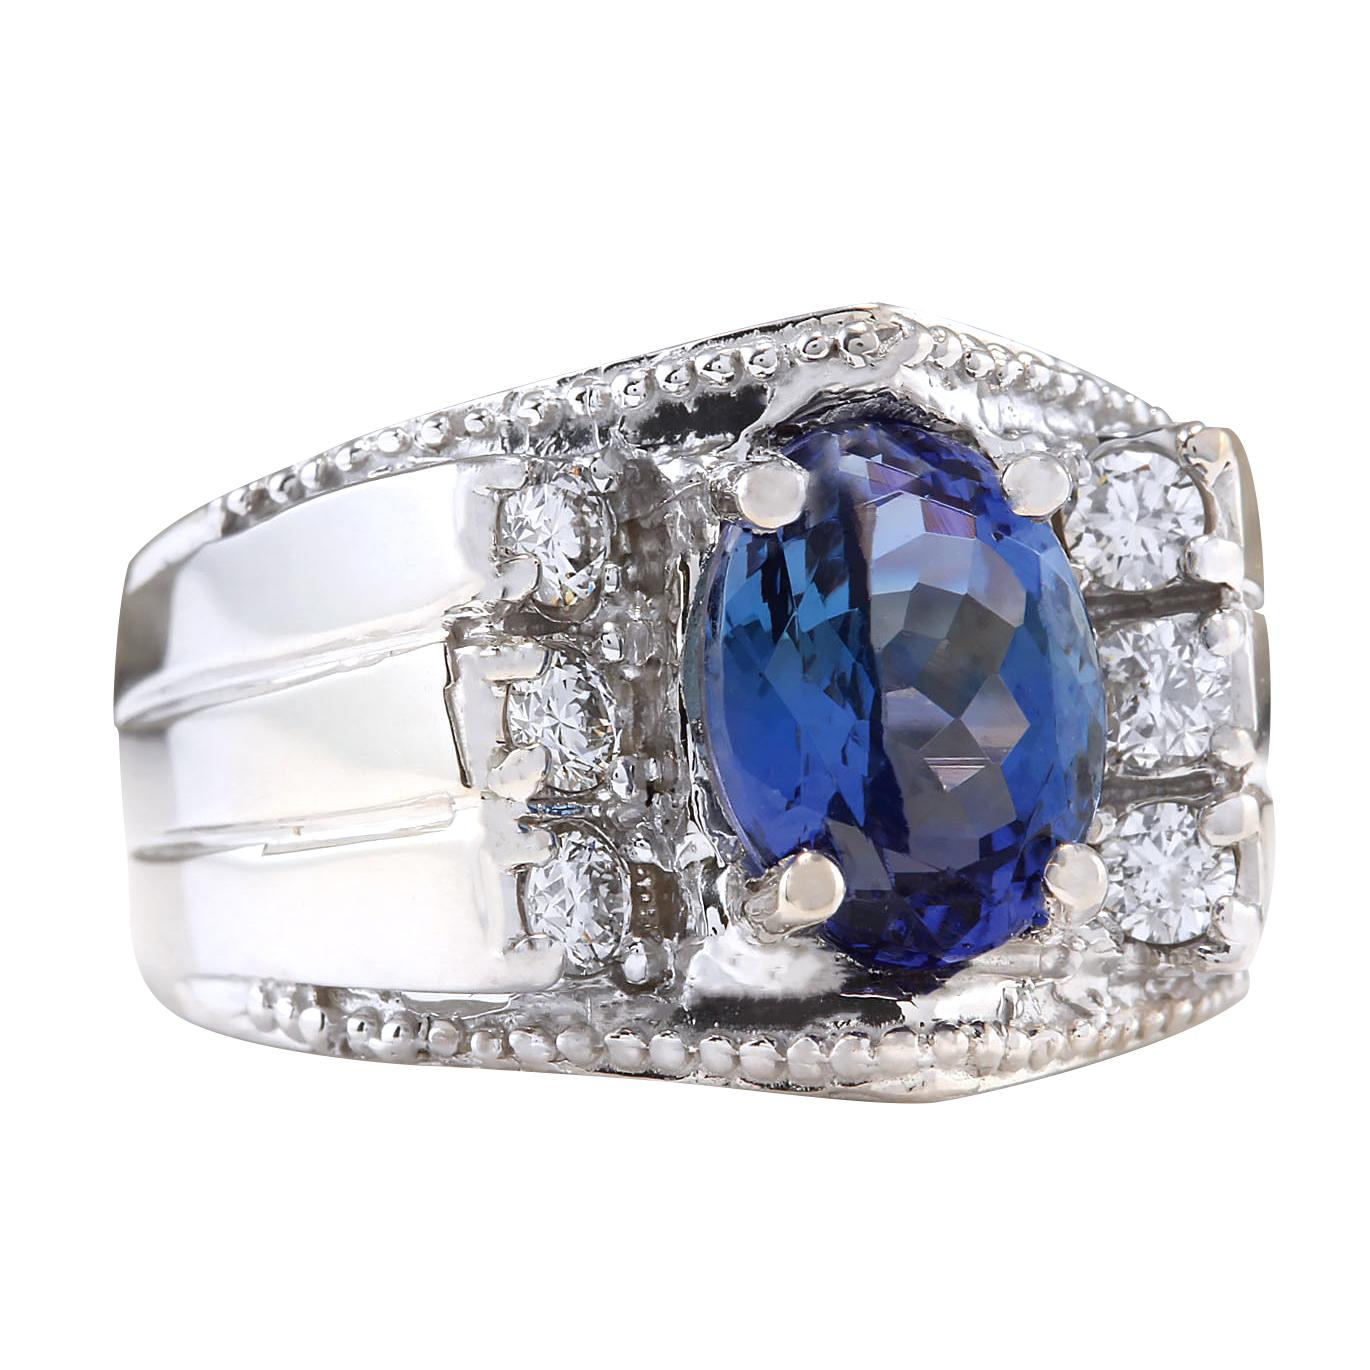 Stamped: 14K White Gold
Total Ring Weight: 14.0 Grams
Total Natural Tanzanite Weight is 4.02 Carat (Measures: 10.00x8.00 mm)
Color: Blue
Total Natural Diamond Weight is 0.60 Carat
Color: F-G, Clarity: VS2-SI1
Face Measures: 15.40x17.40 mm
Sku: